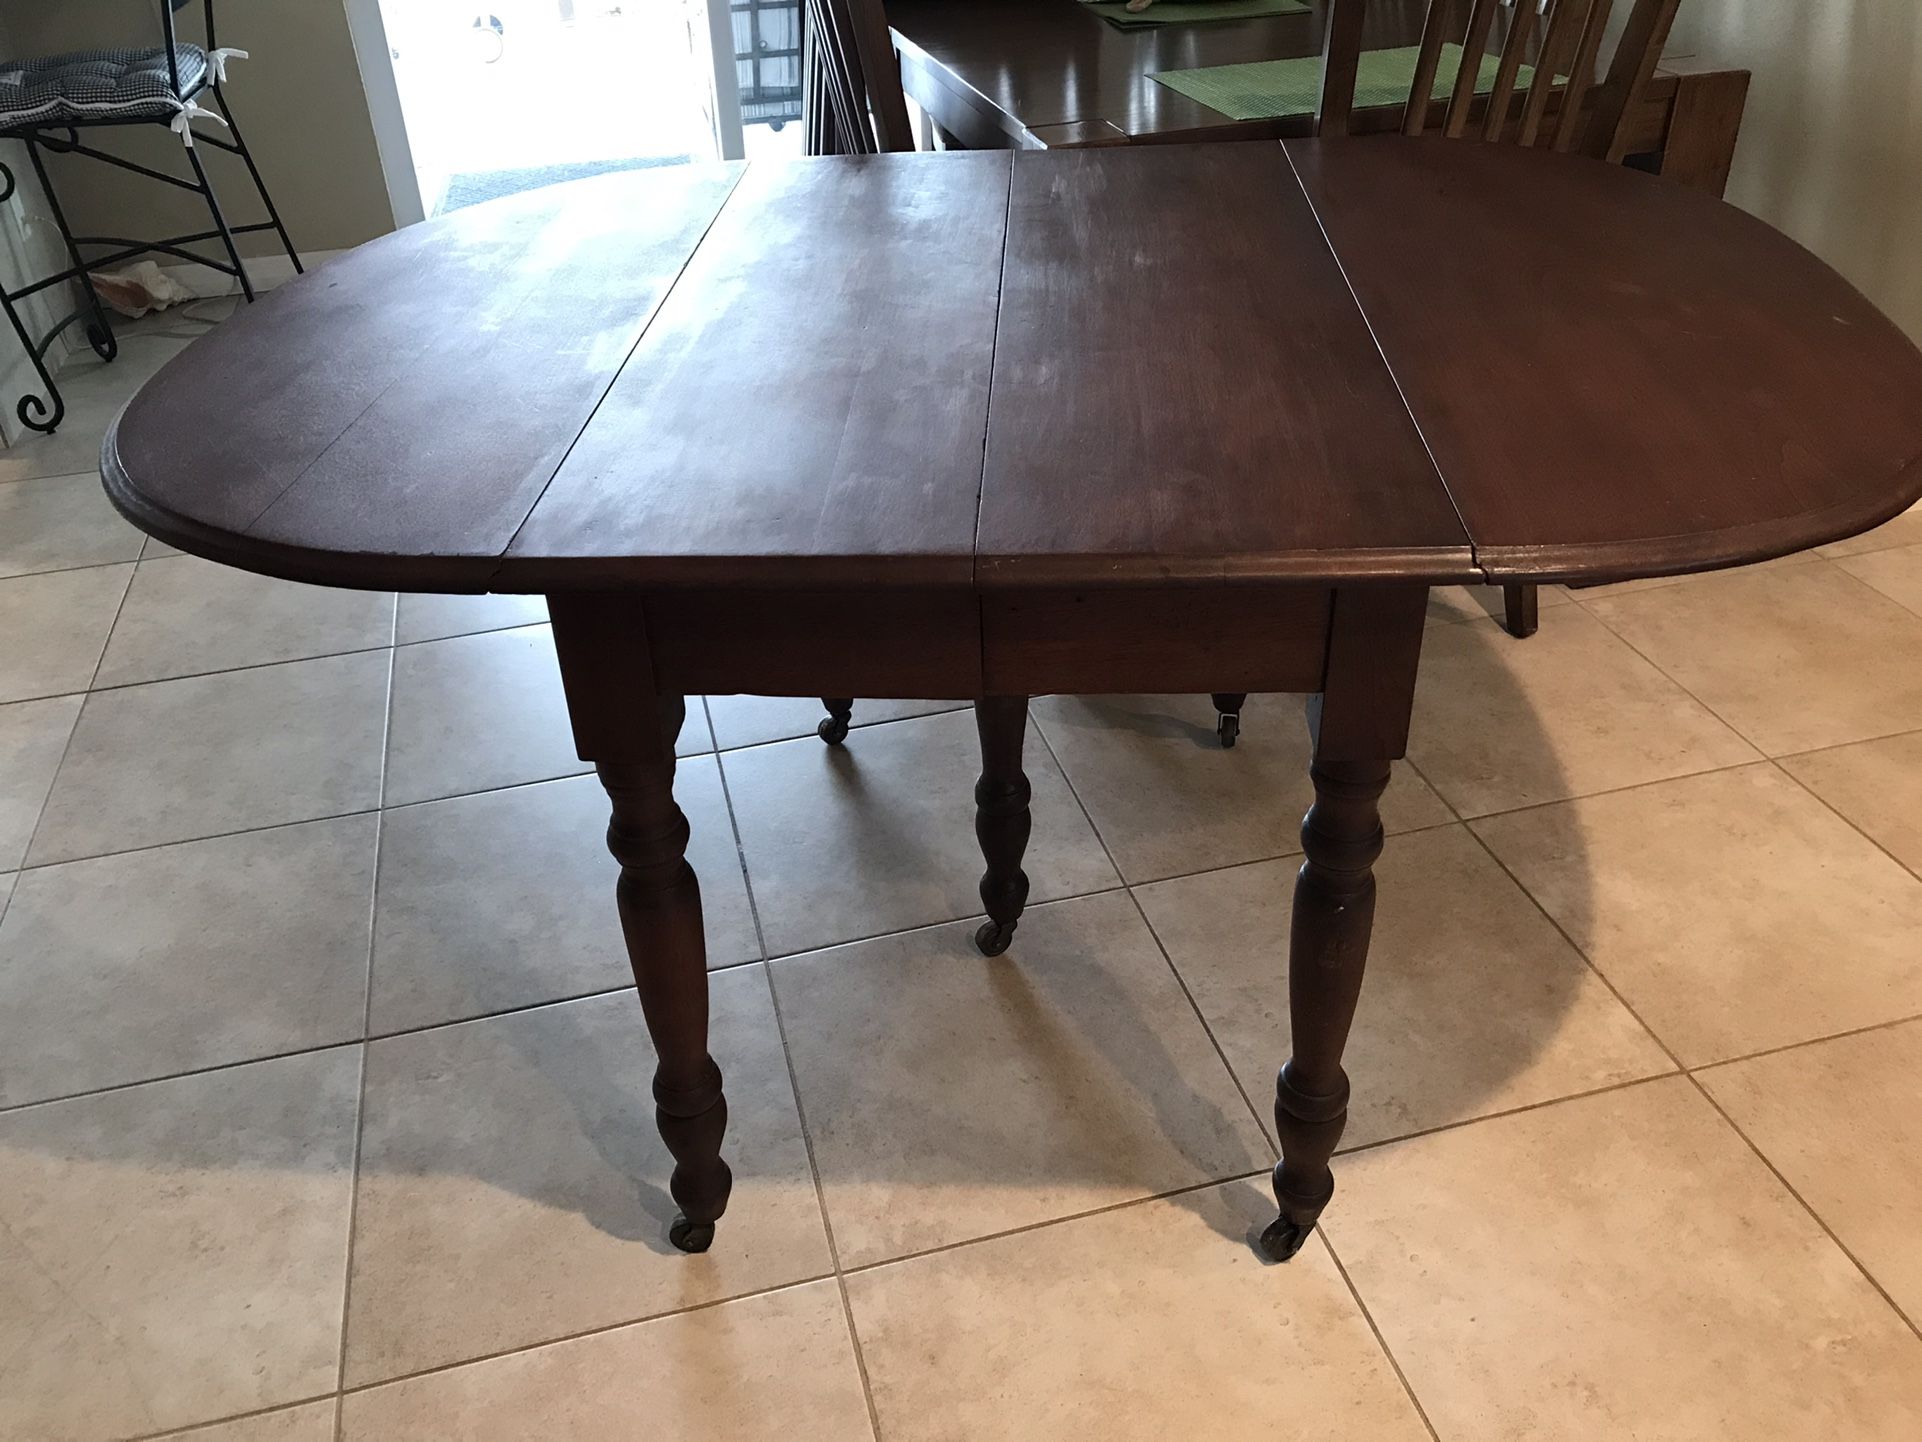  Early American Mid To Late 19th Century Drop Leaf Gate Leg Dining Table 